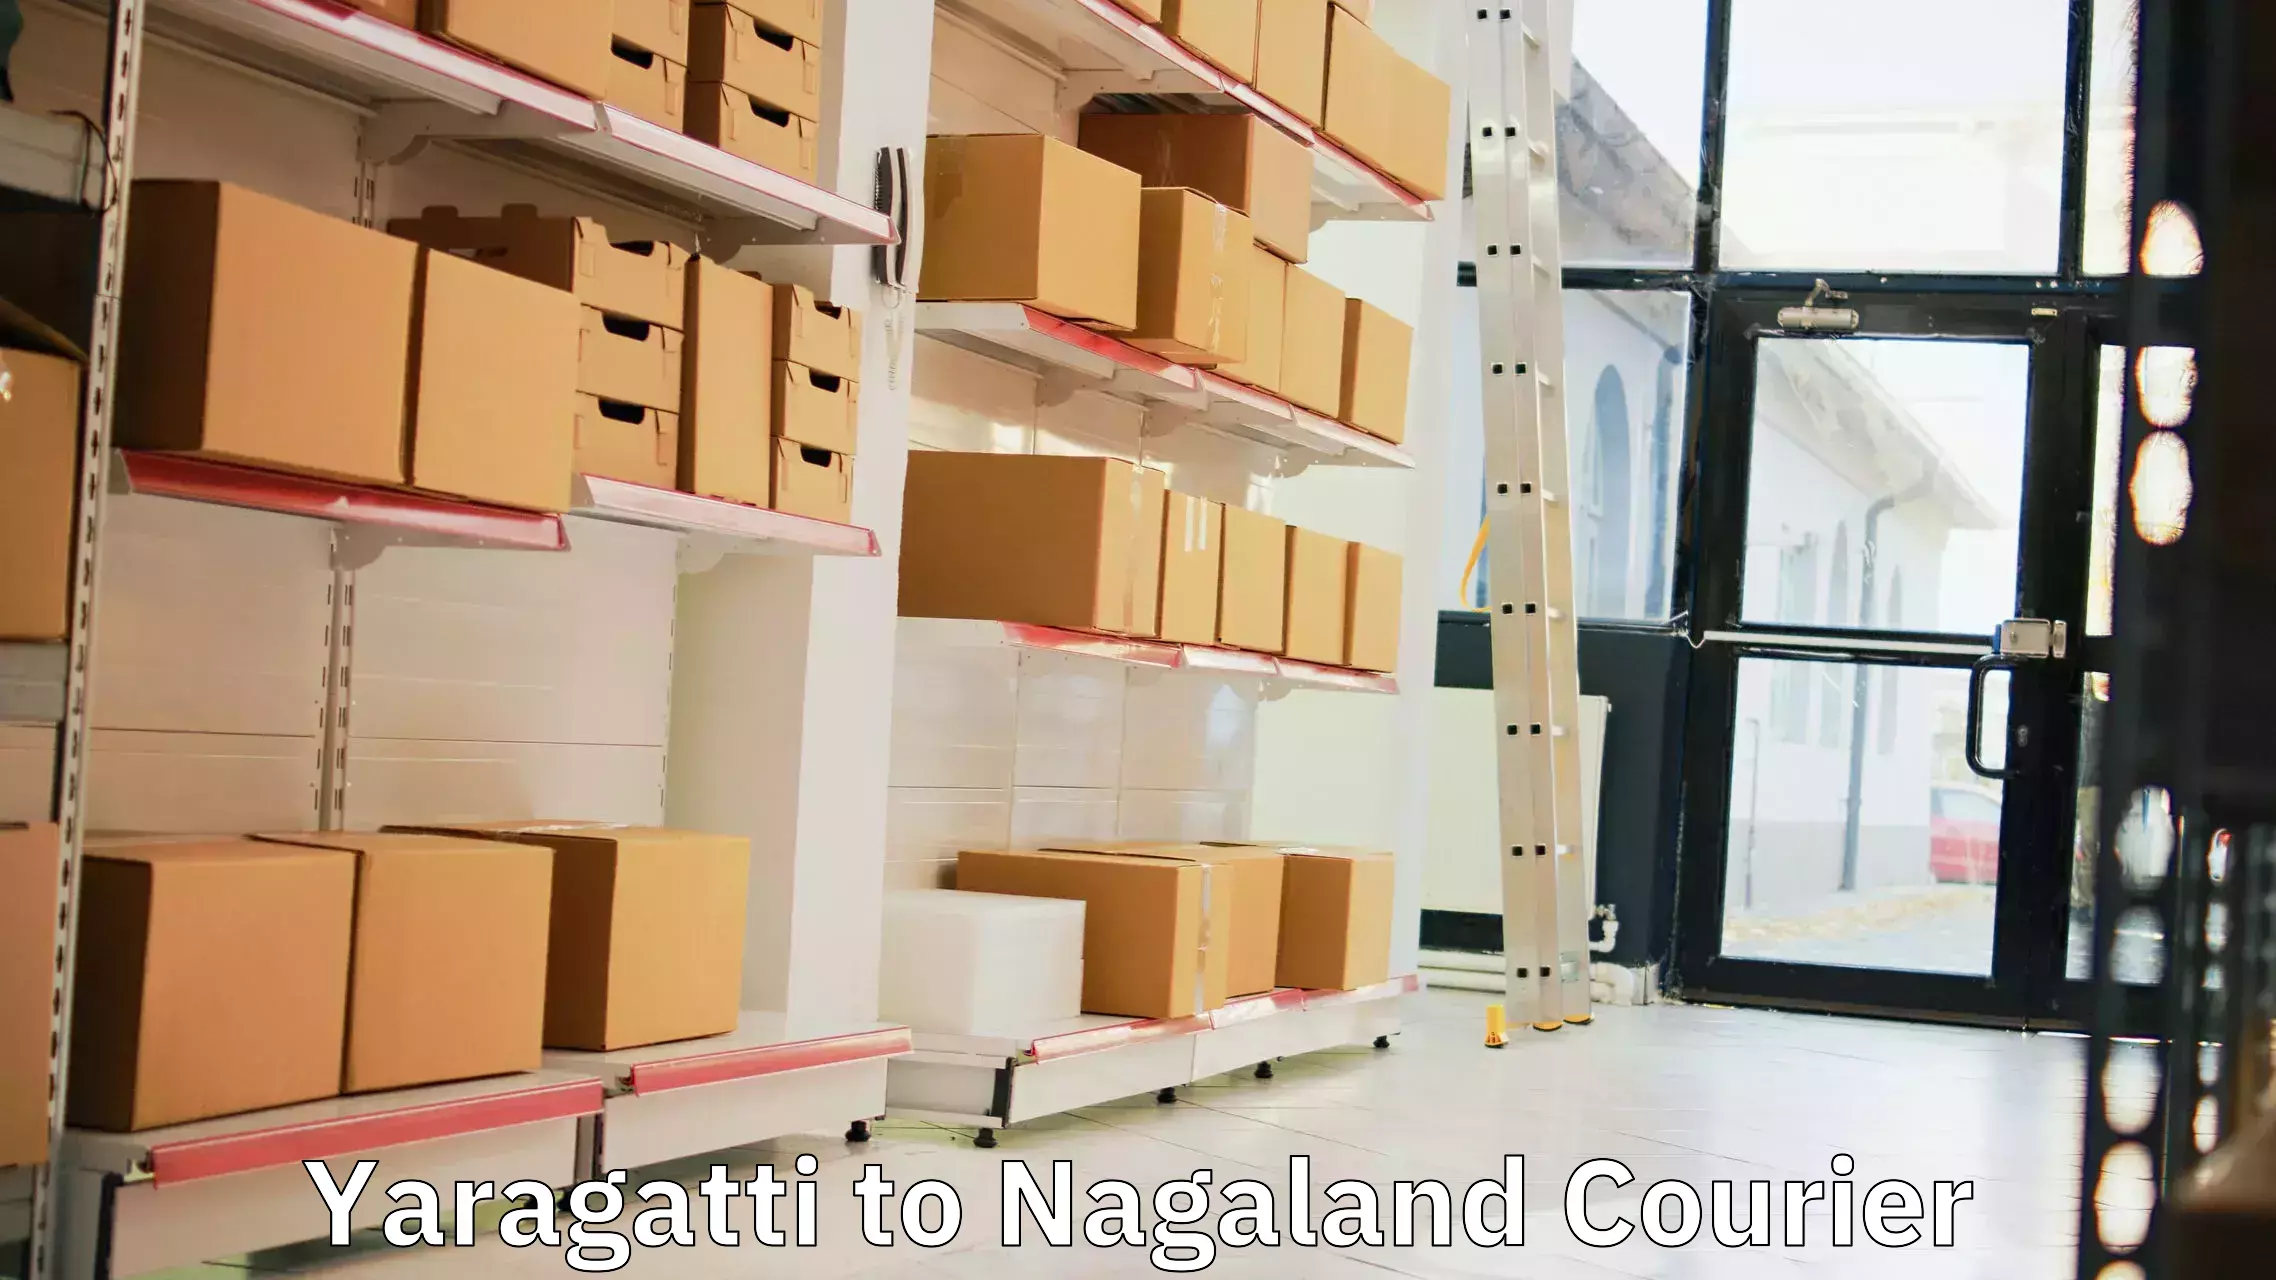 Courier dispatch services Yaragatti to Nagaland